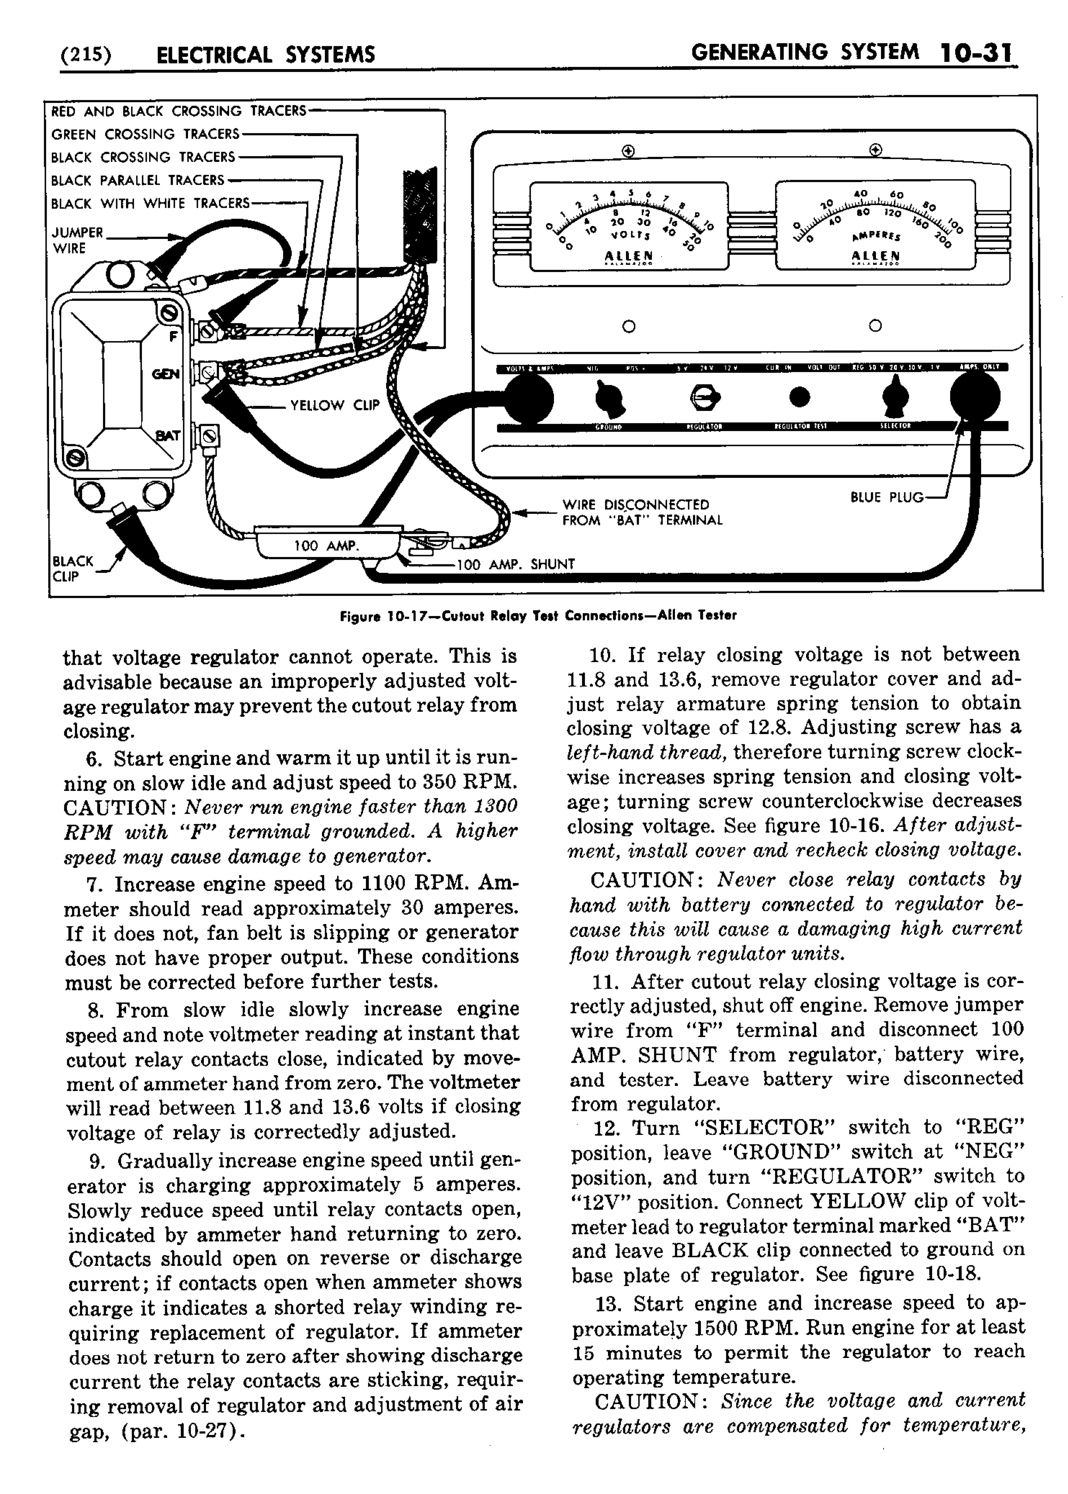 n_11 1953 Buick Shop Manual - Electrical Systems-031-031.jpg